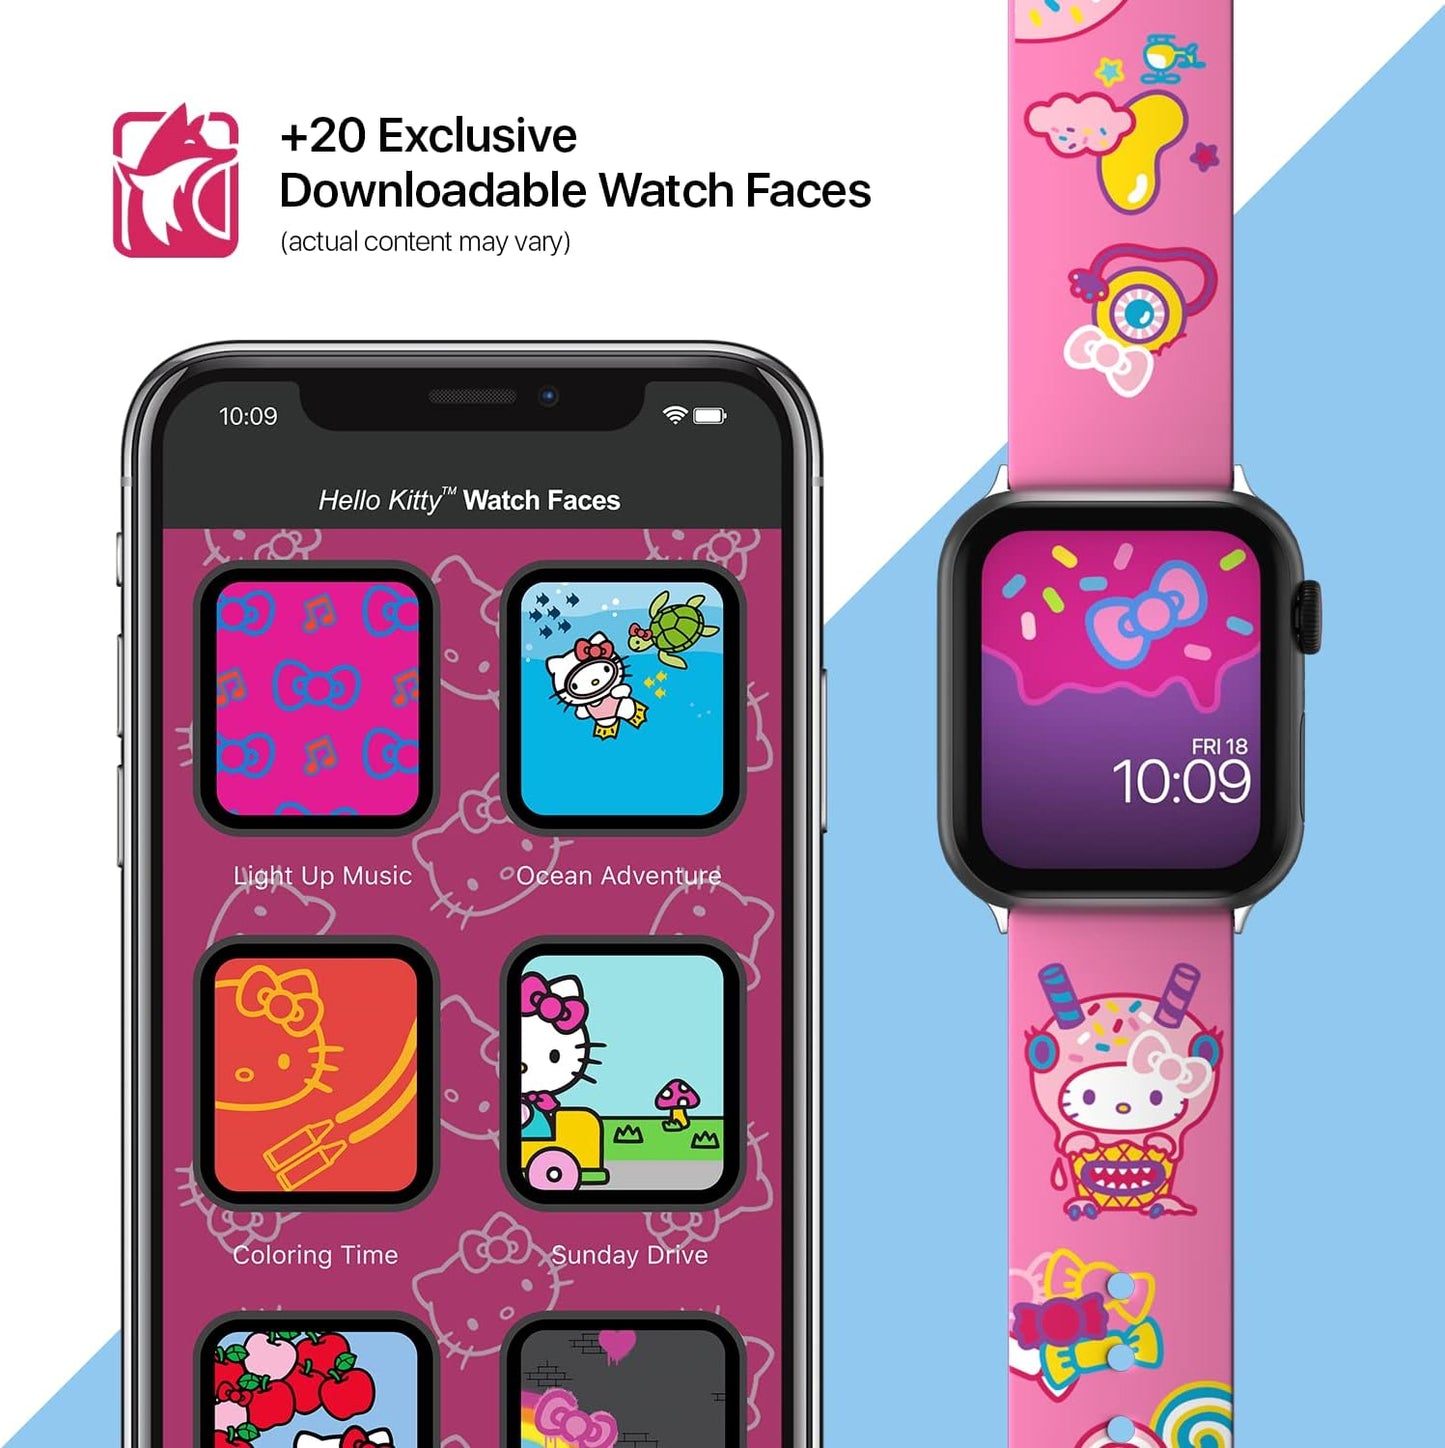 Hello Kitty Smartwatch Band - Officially Licensed, Compatible with Apple Watch (Not Included)